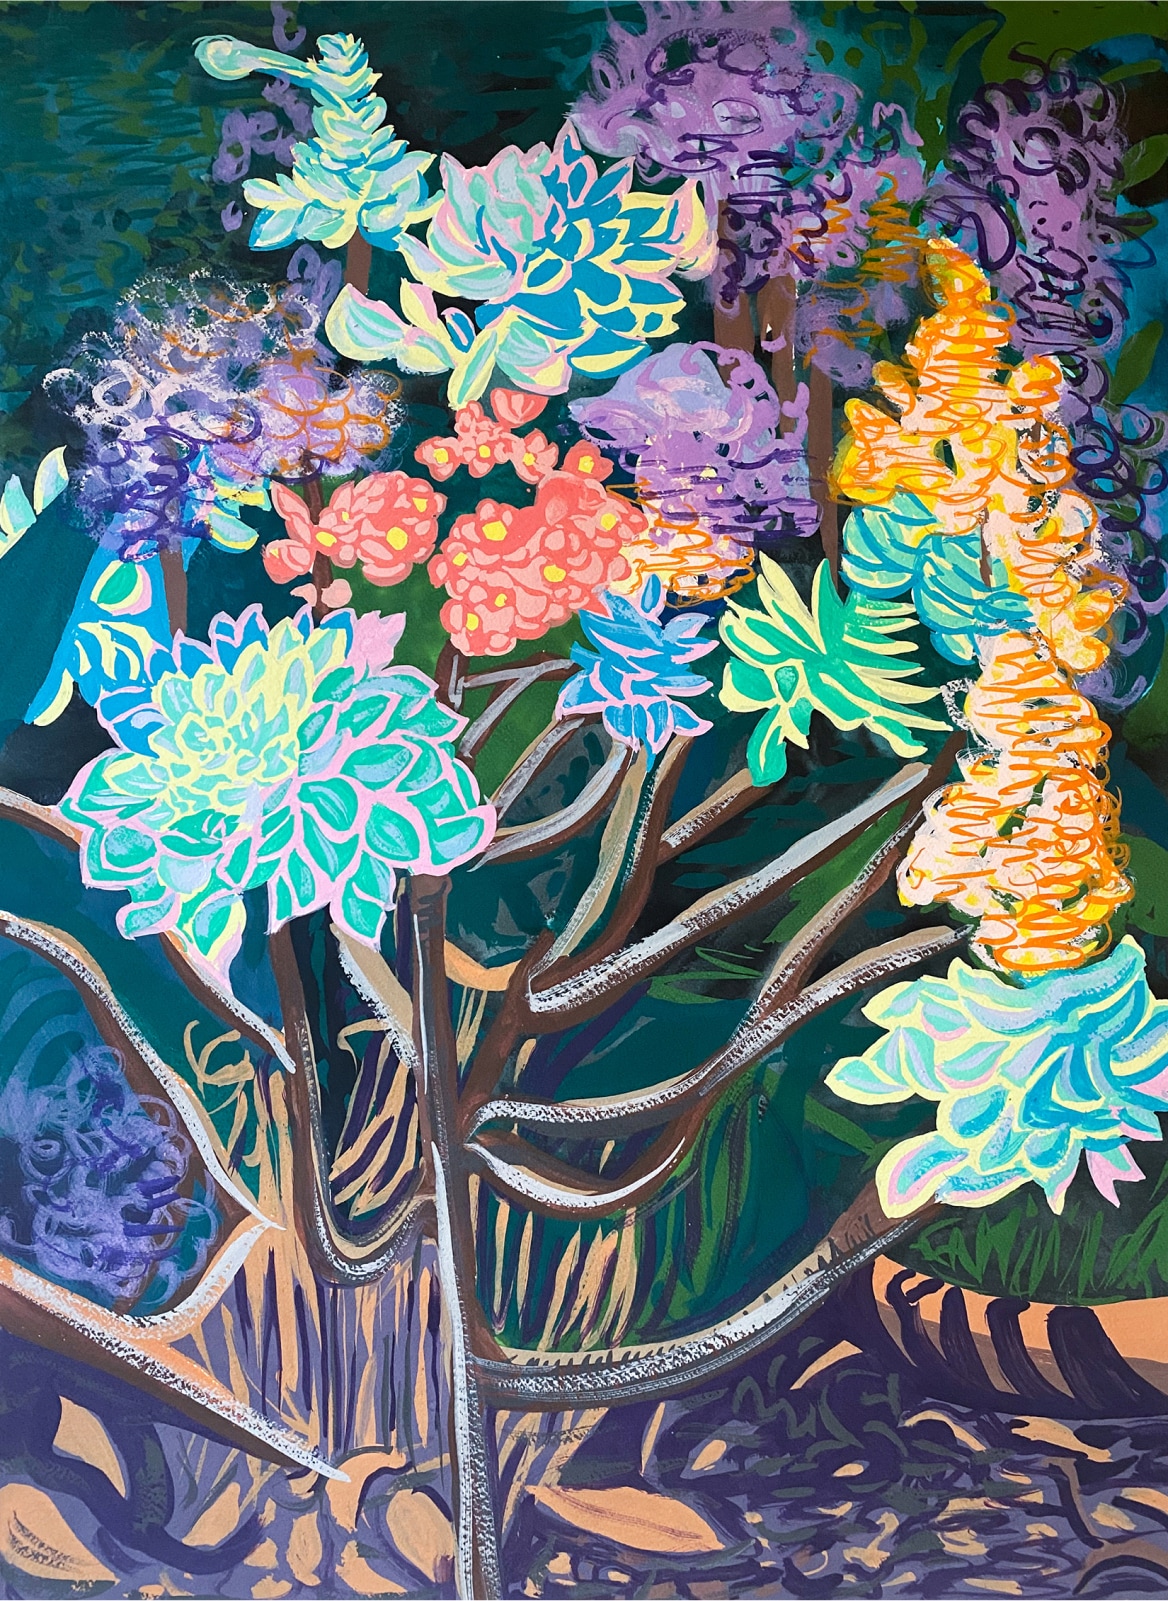 Artwork featuring purple lilac blooms mixed with brightly colored succulents, arranged on woody stems